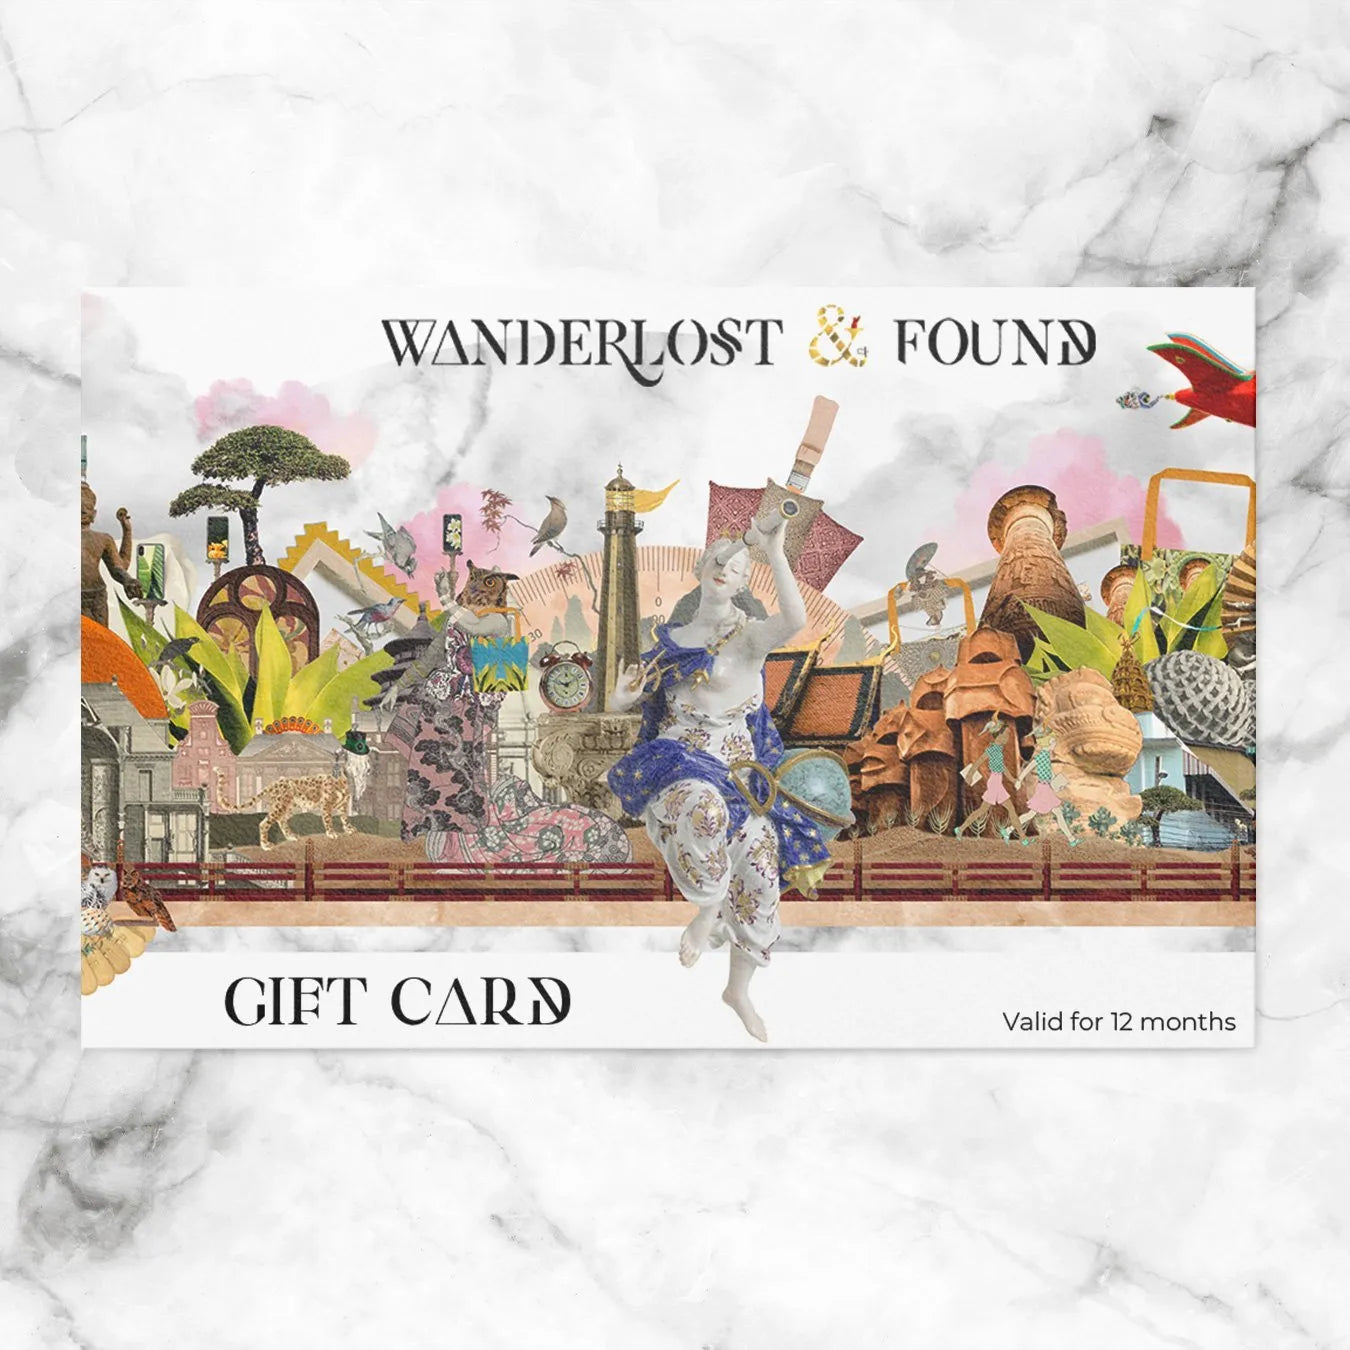 Wanderlost Gift Card - Usd 10.00 - Cards - Toby Leon